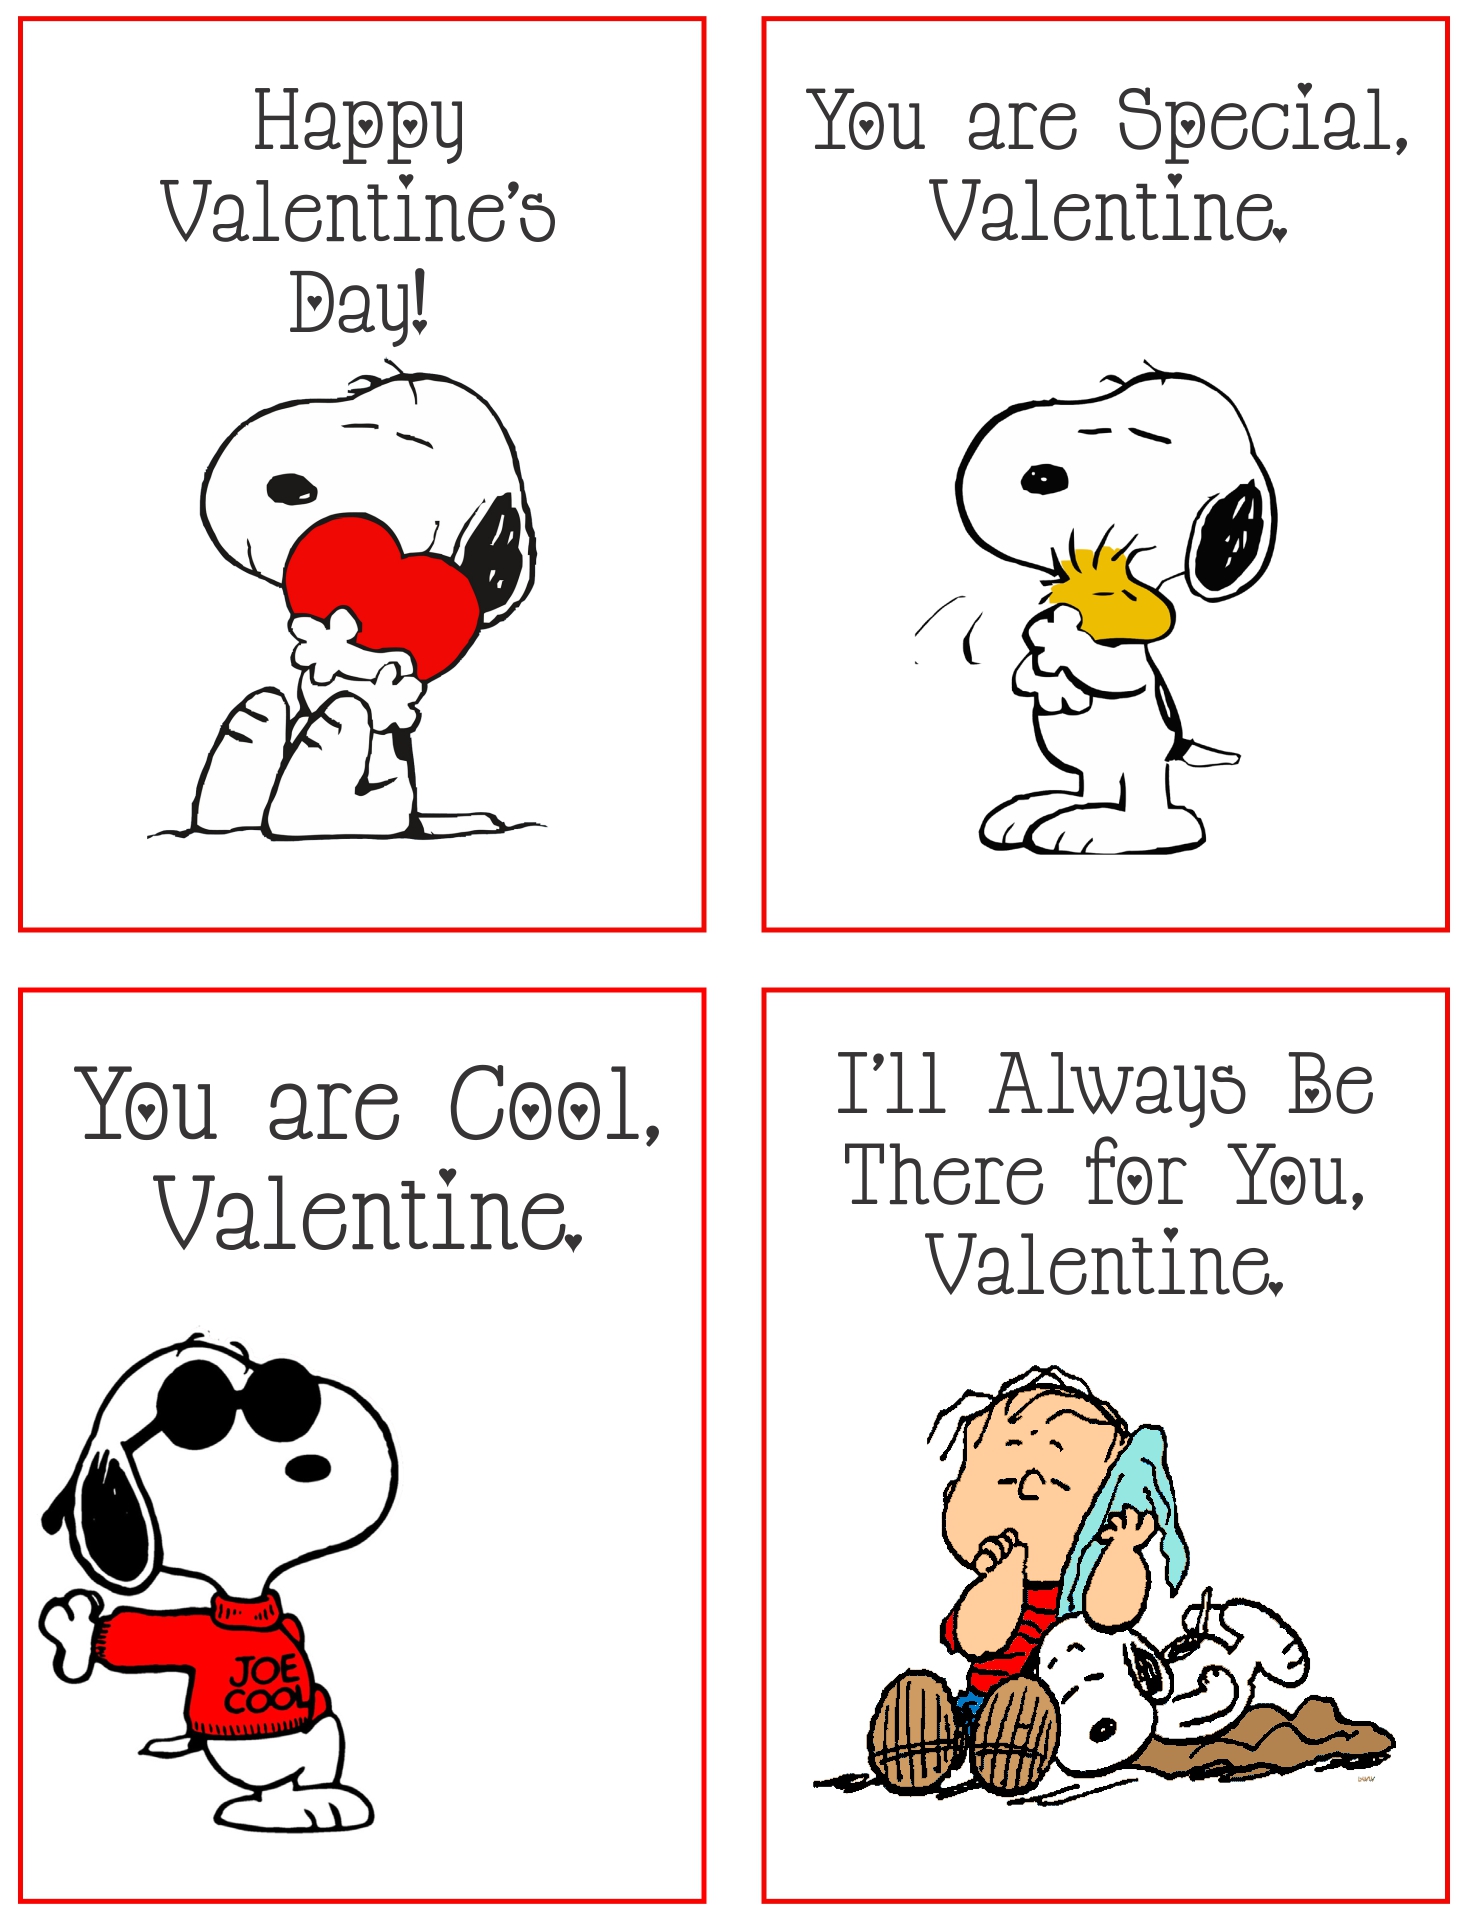 printable-jokes-funny-valentines-cards-get-your-hands-on-amazing-free